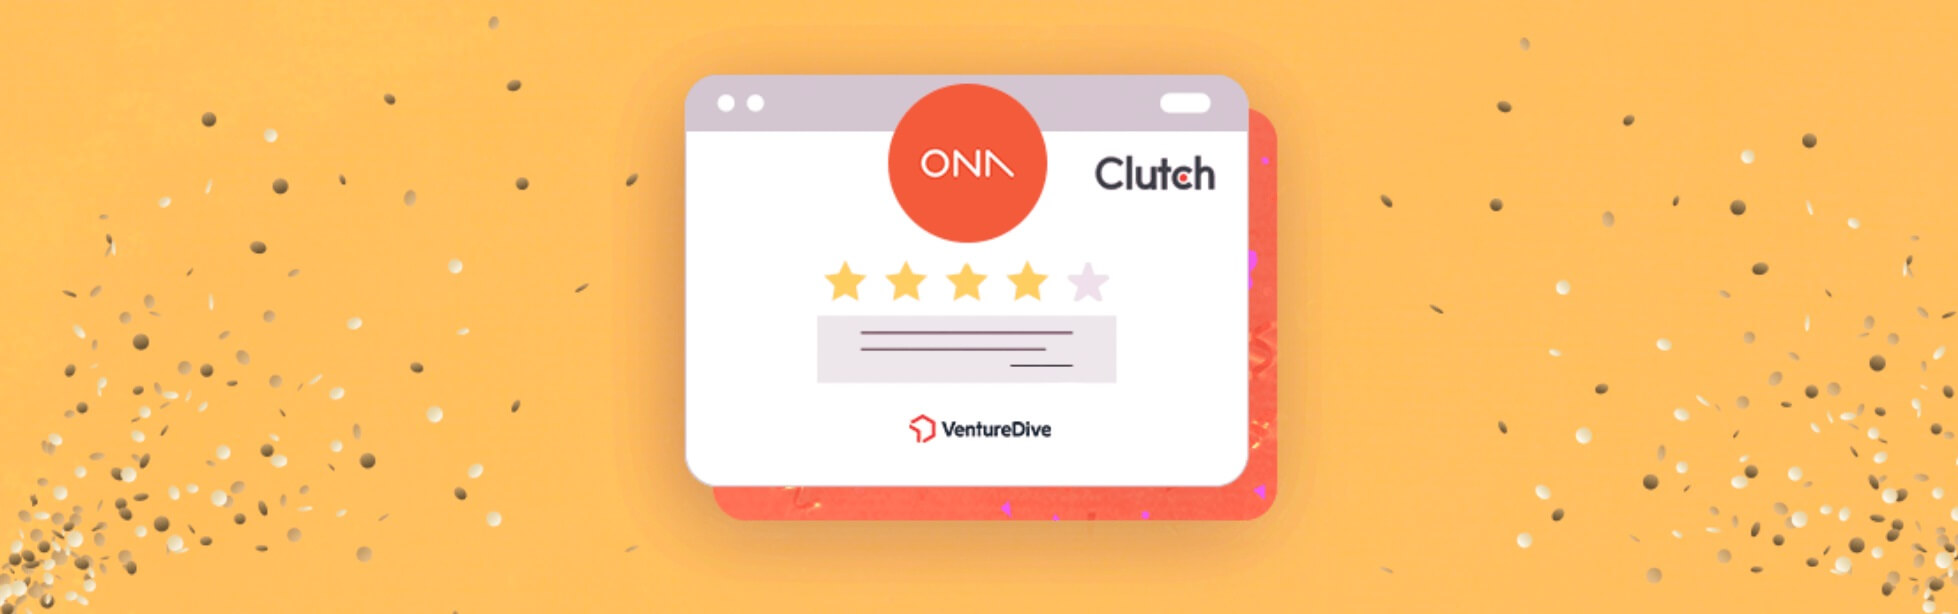 ona-clutch-review2